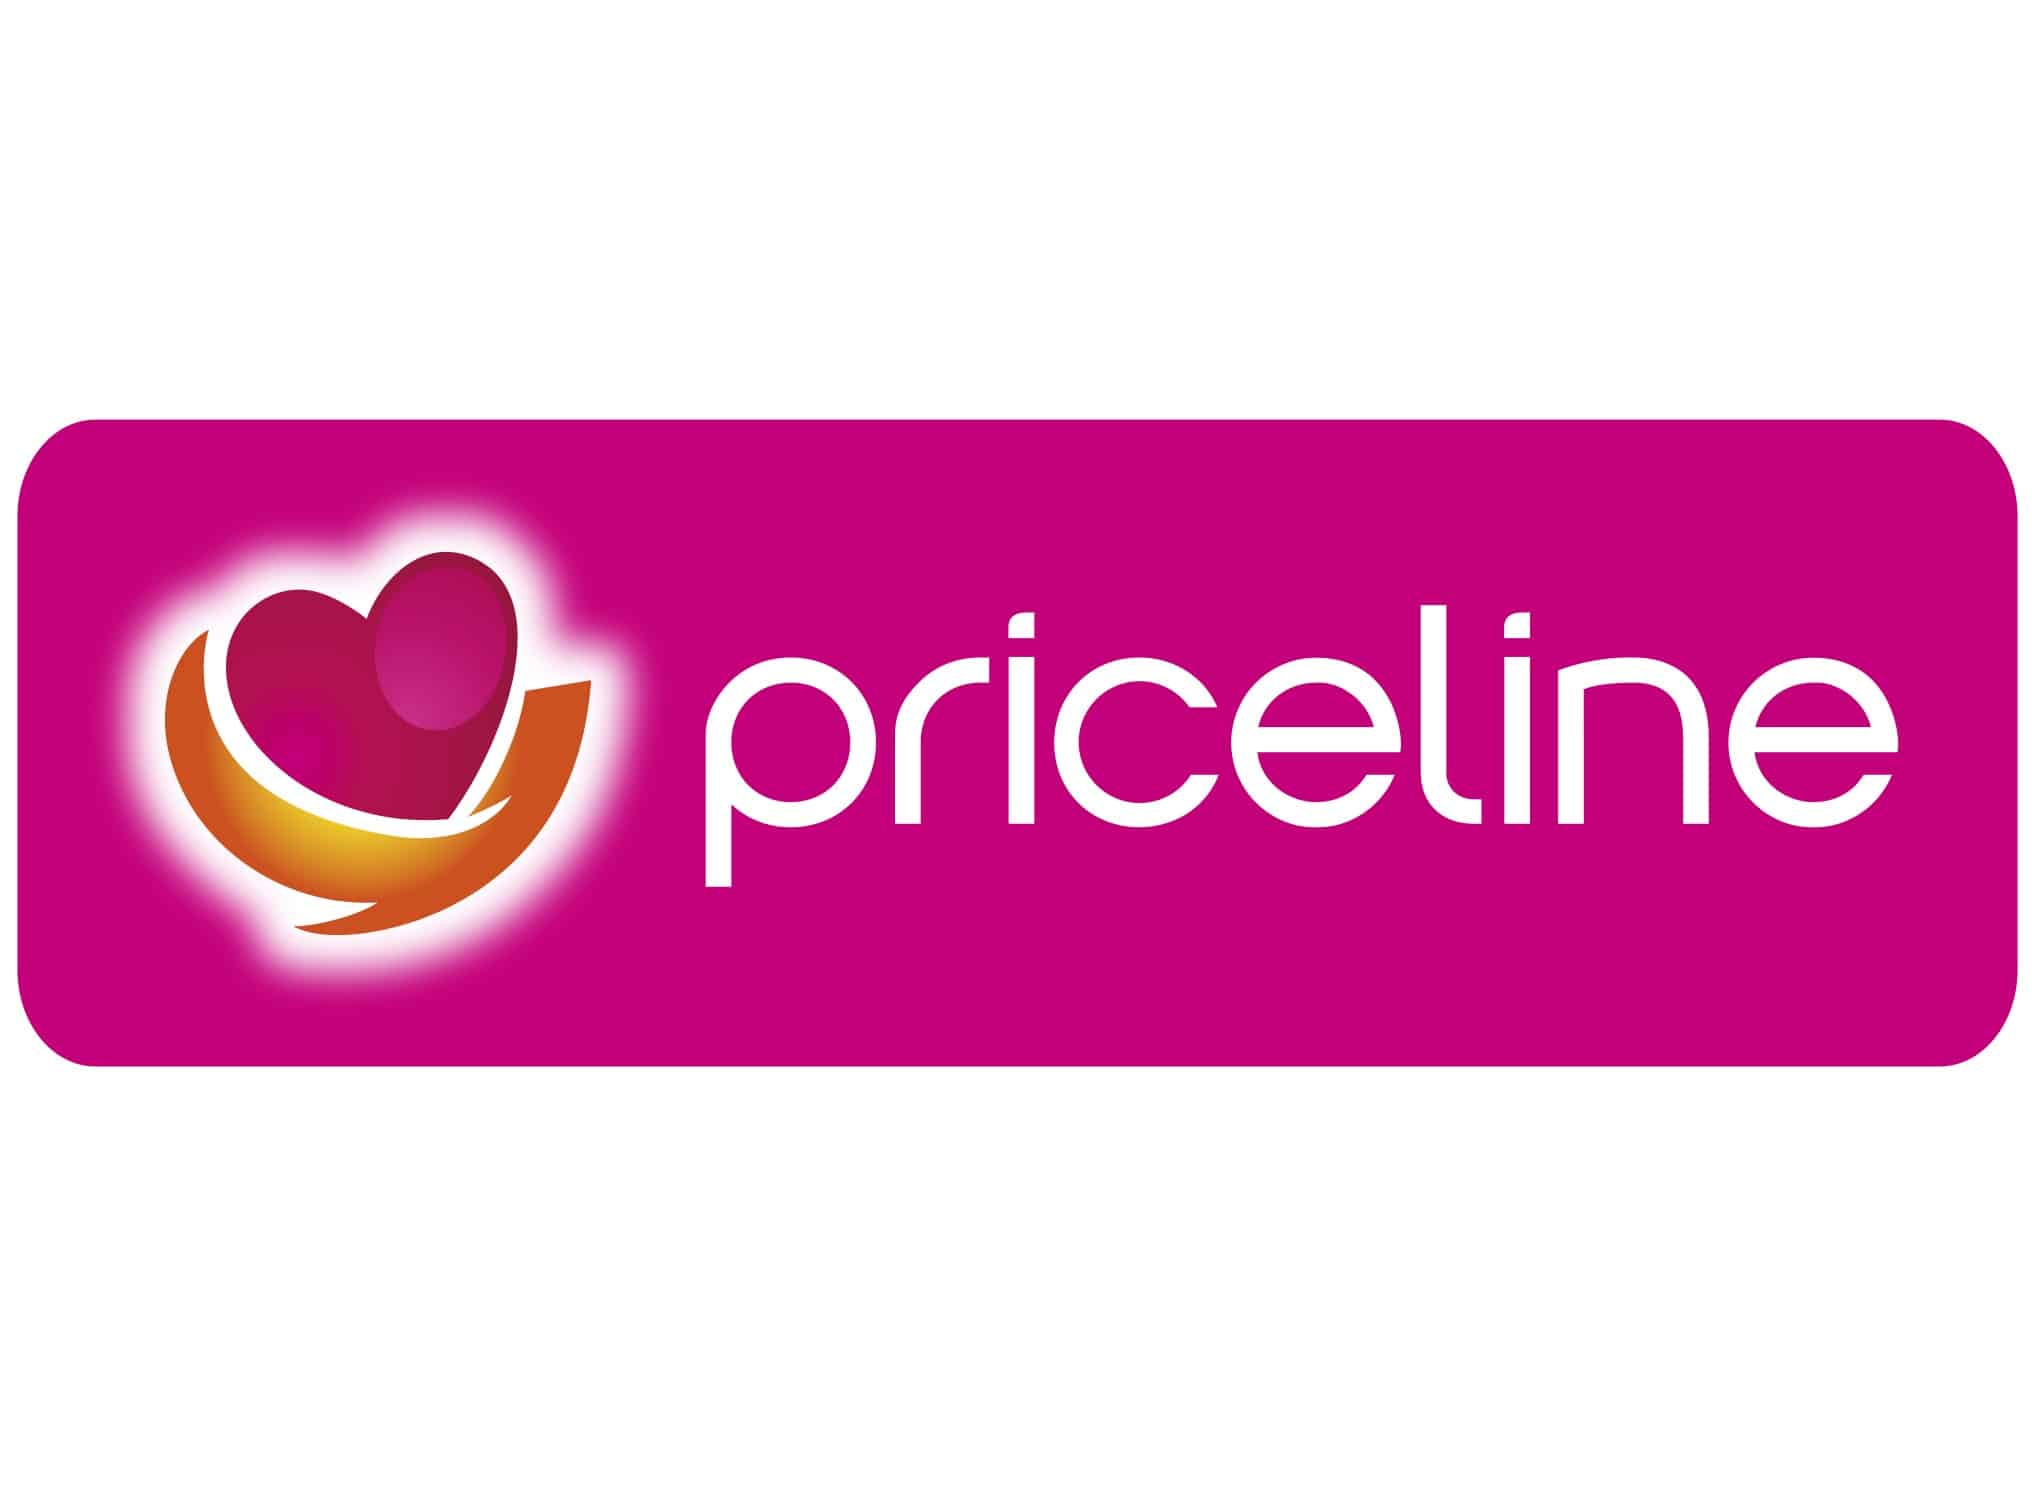 priceline.com offers discount to long lost twins